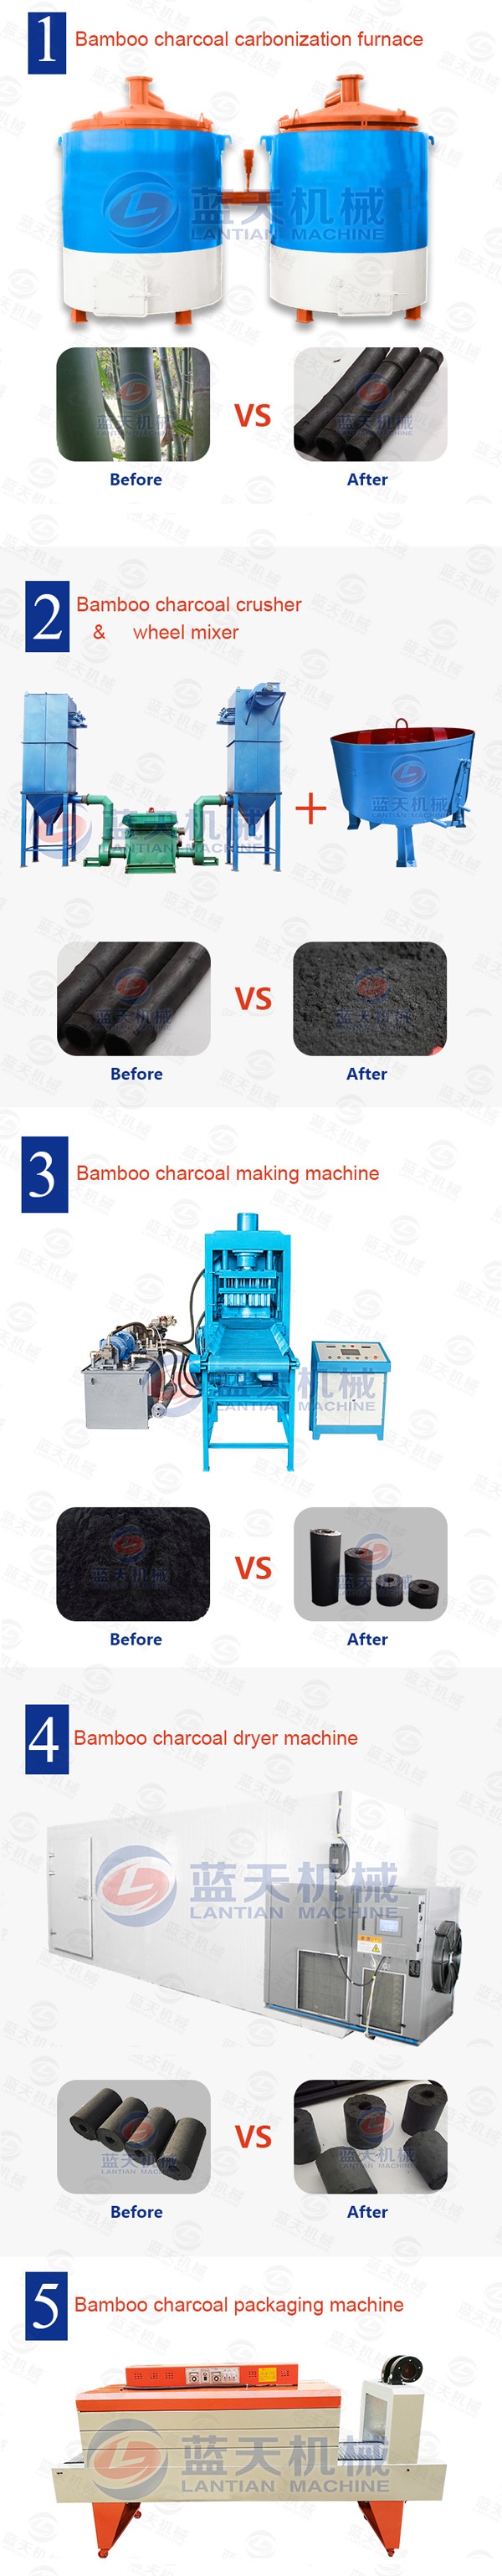 Product line of bamboo charcoal making machine